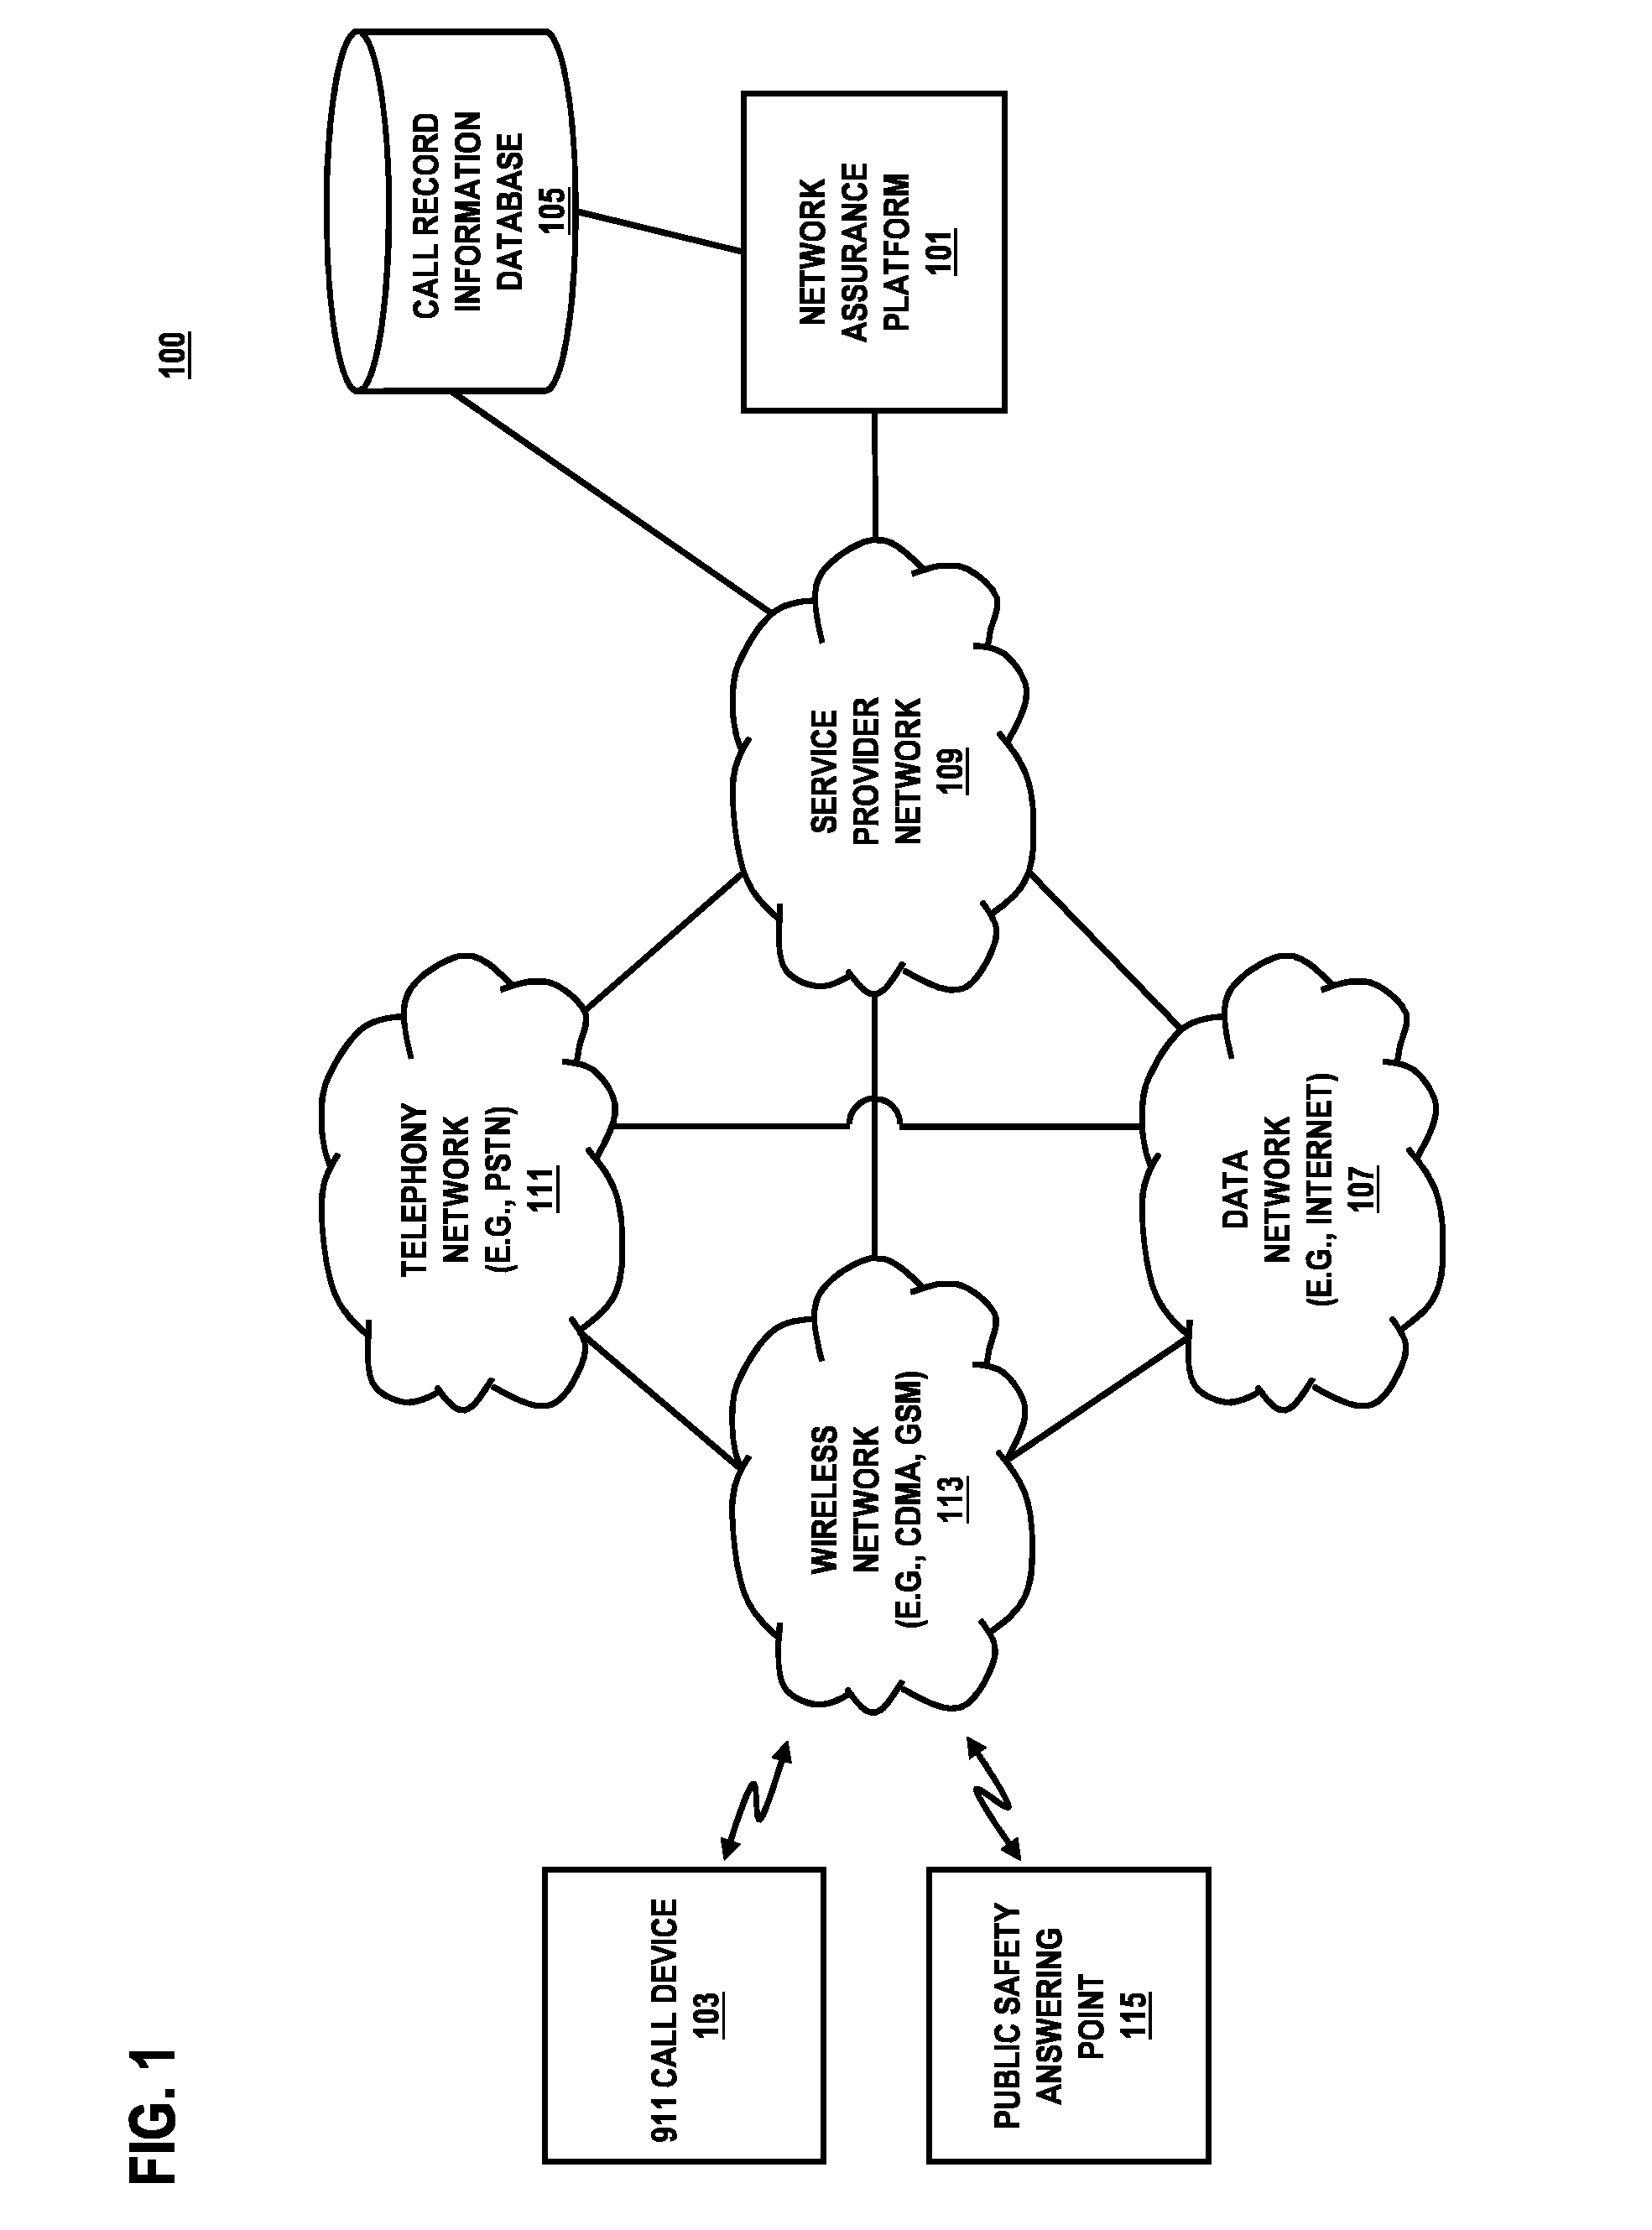 System and method for providing proactive service assurance in emergency networks